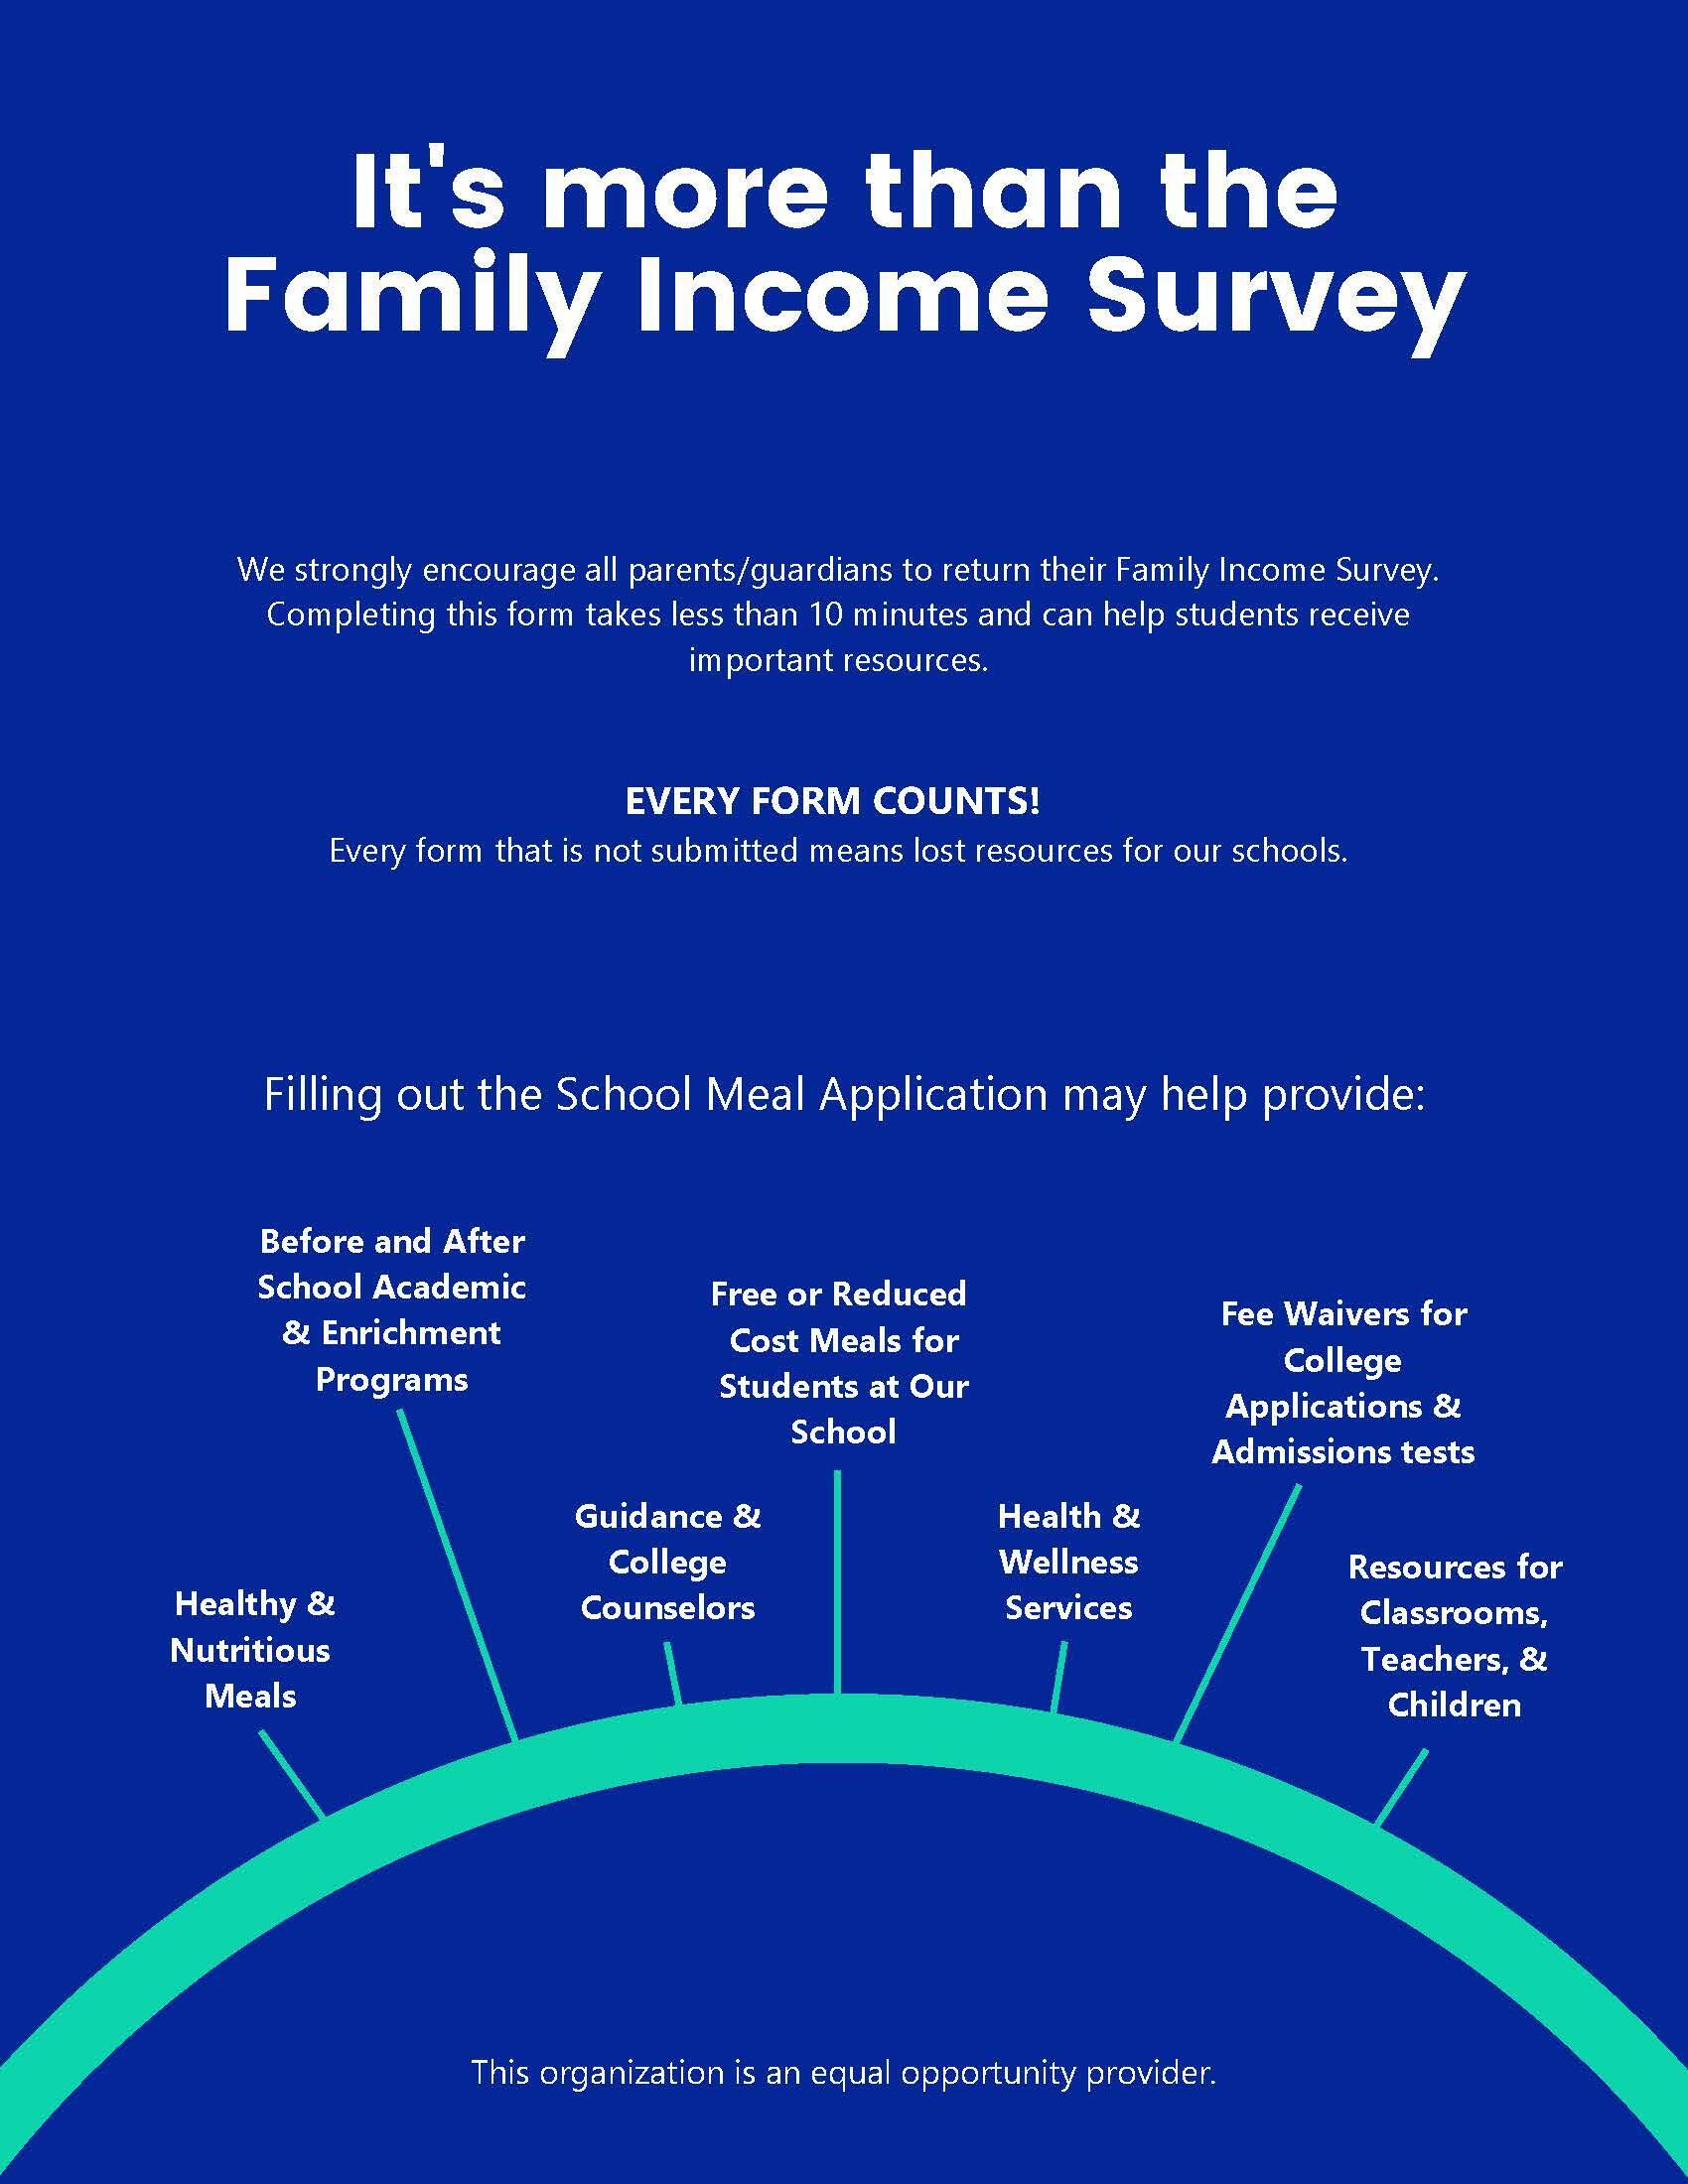 Justification for the Family Income Survey (English)